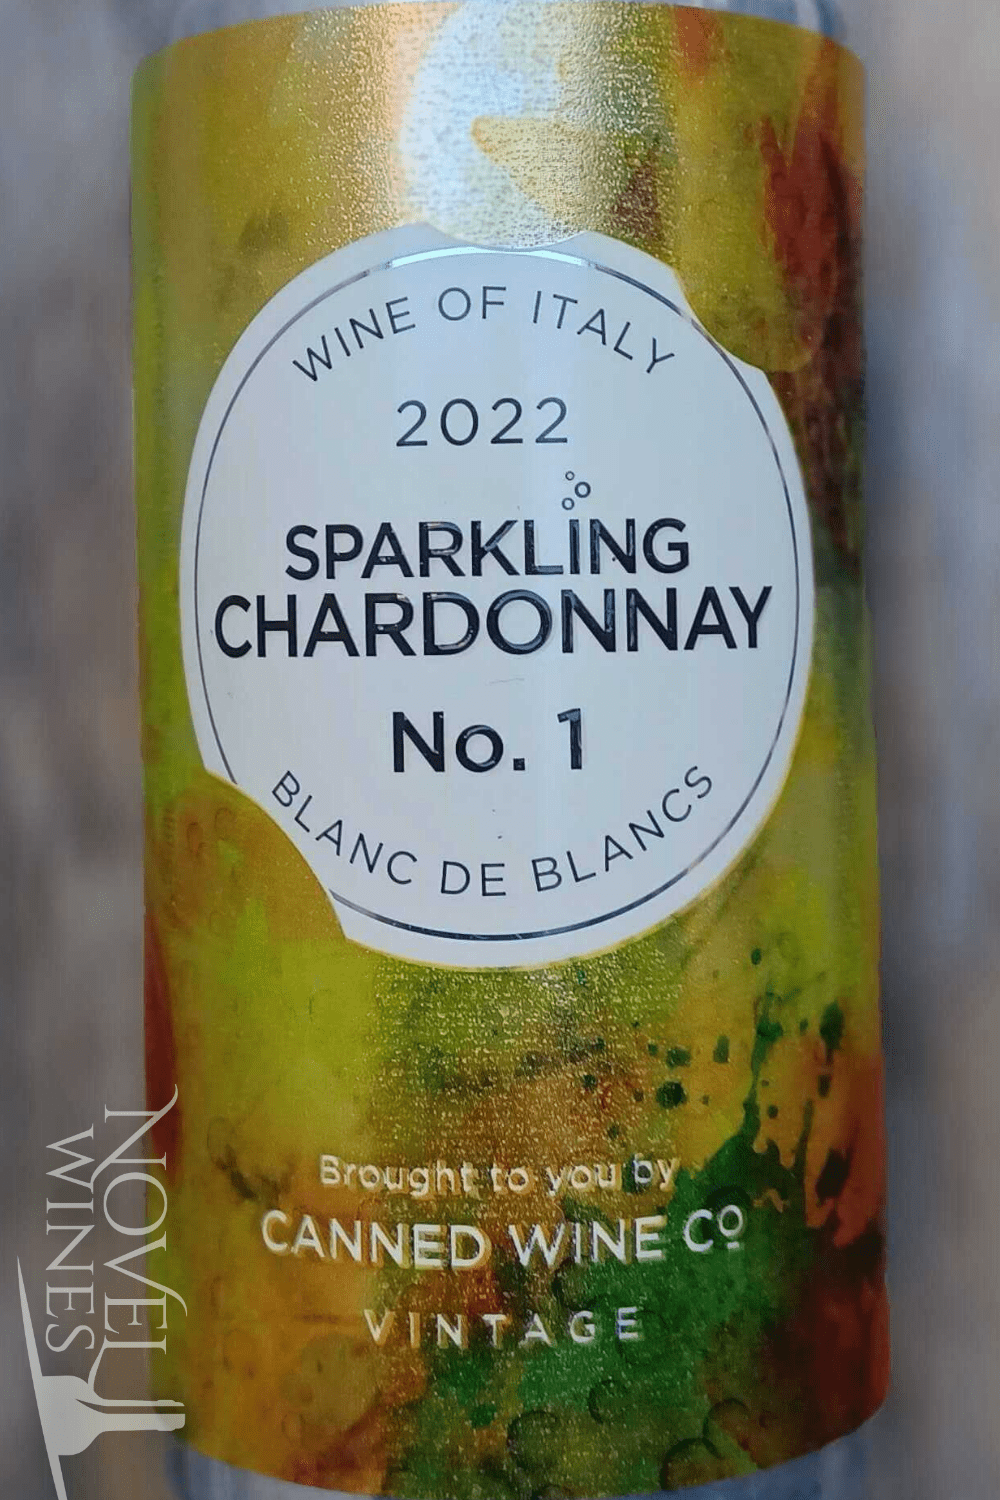 Canned Wine Co White Wine Canned Wine Co. Blanc de Blancs Chardonnay 2022, Italy